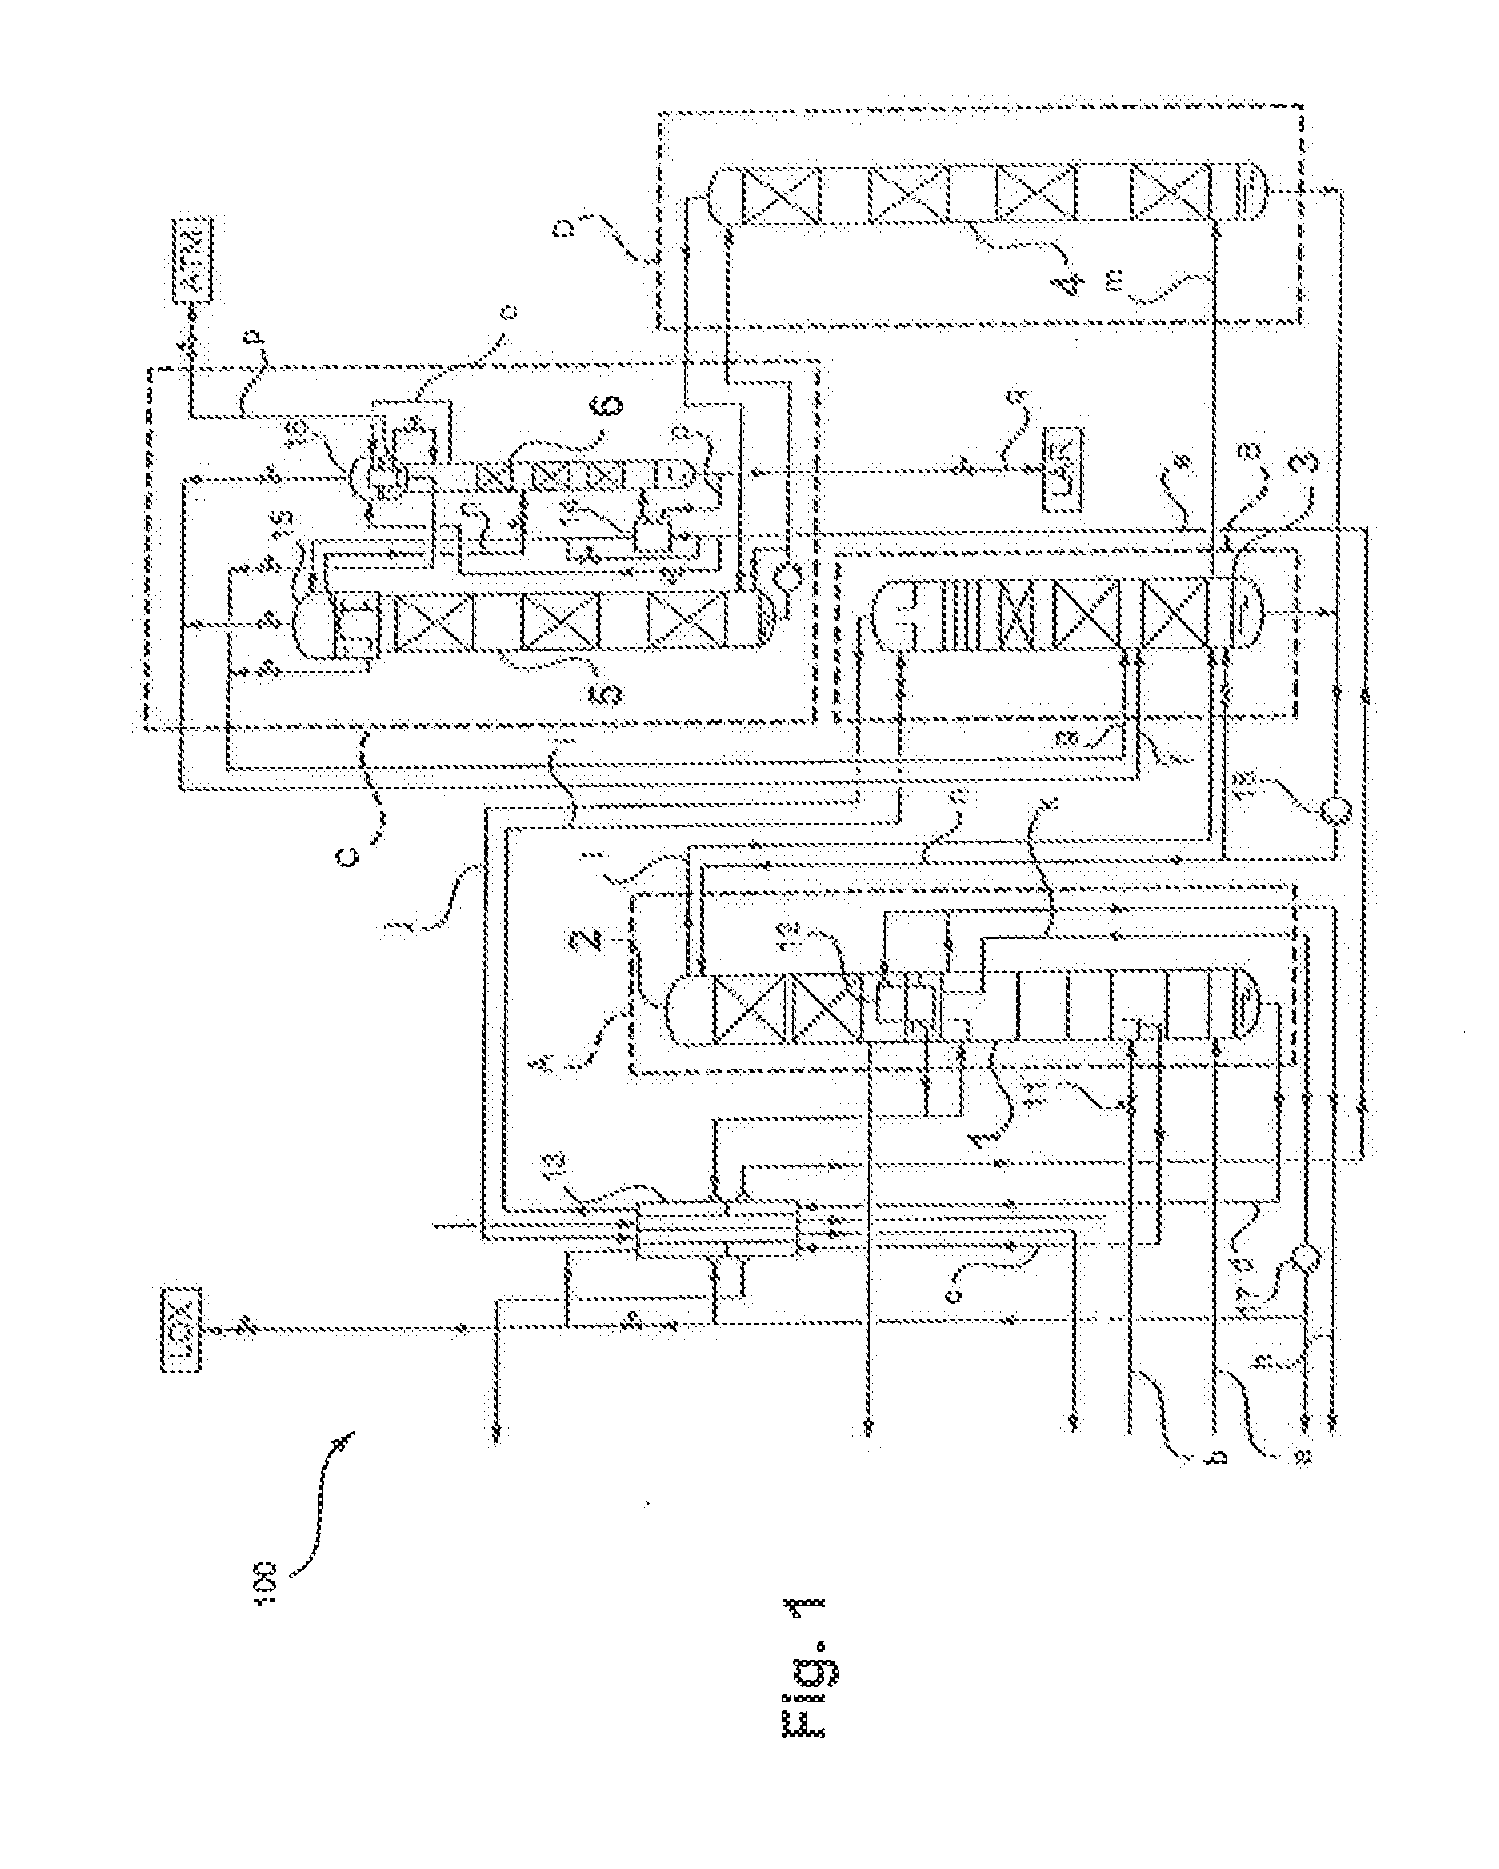 Air separation plant, method for obtaining a product containing argon, and method for creating an air separation plant